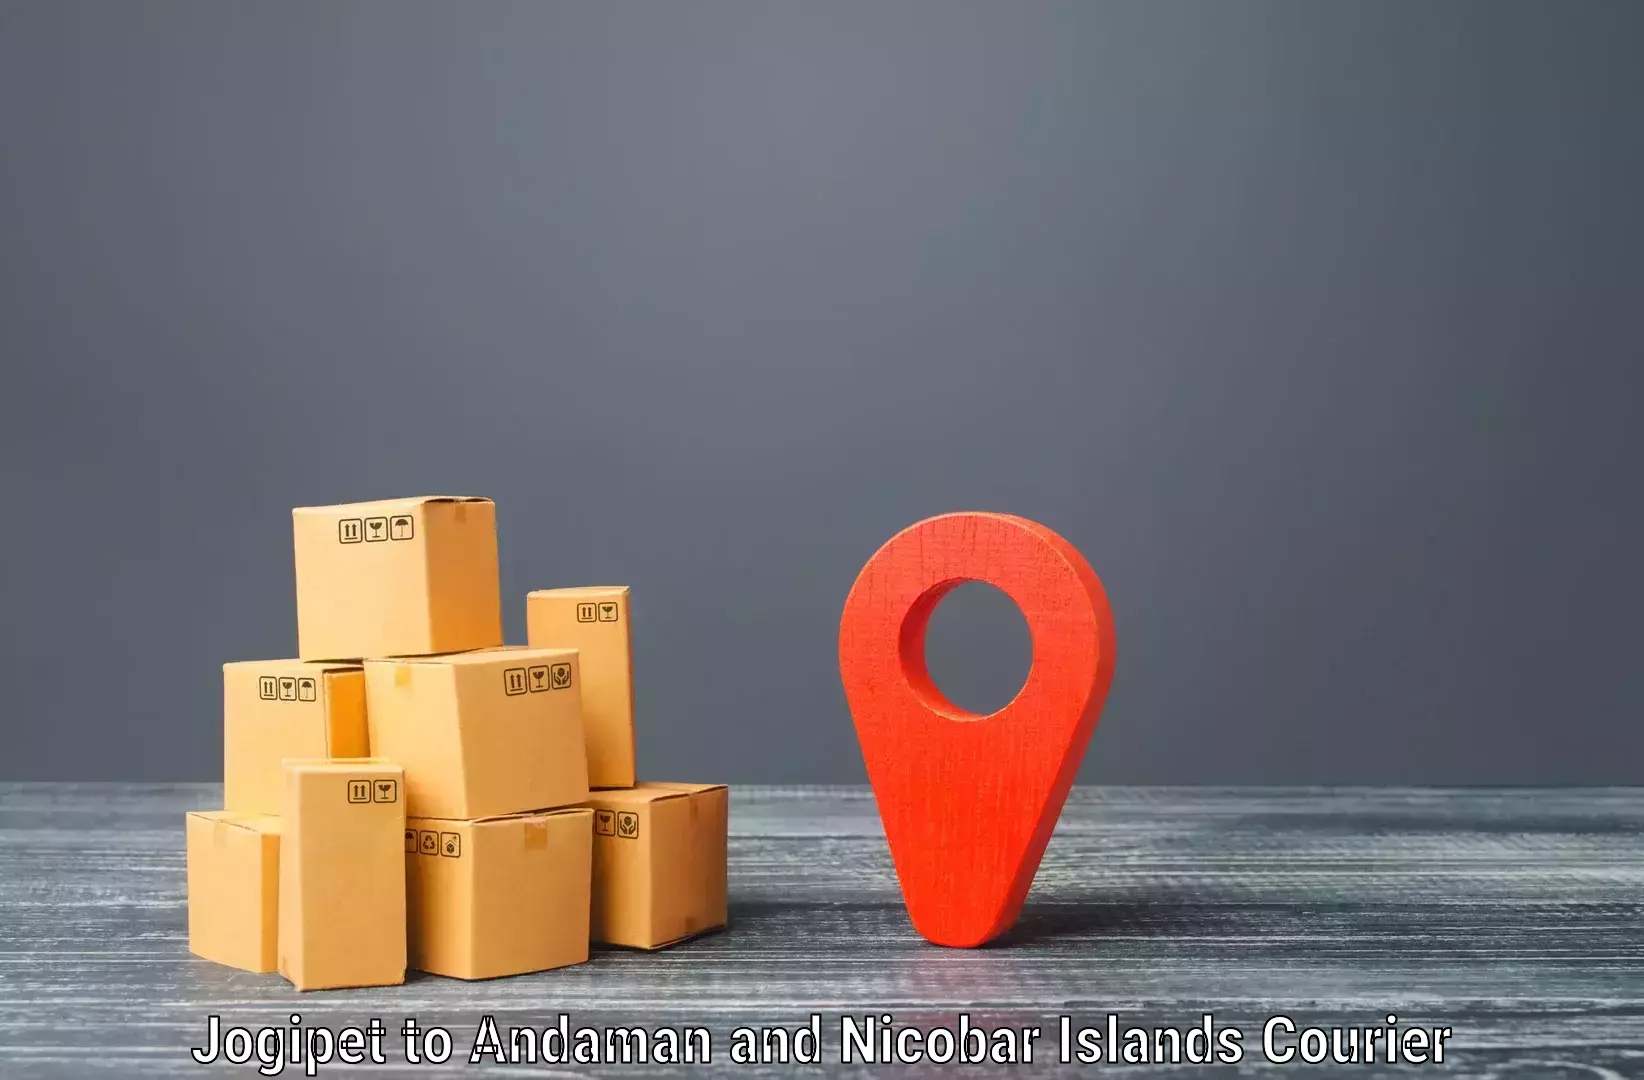 Nationwide shipping coverage Jogipet to Andaman and Nicobar Islands